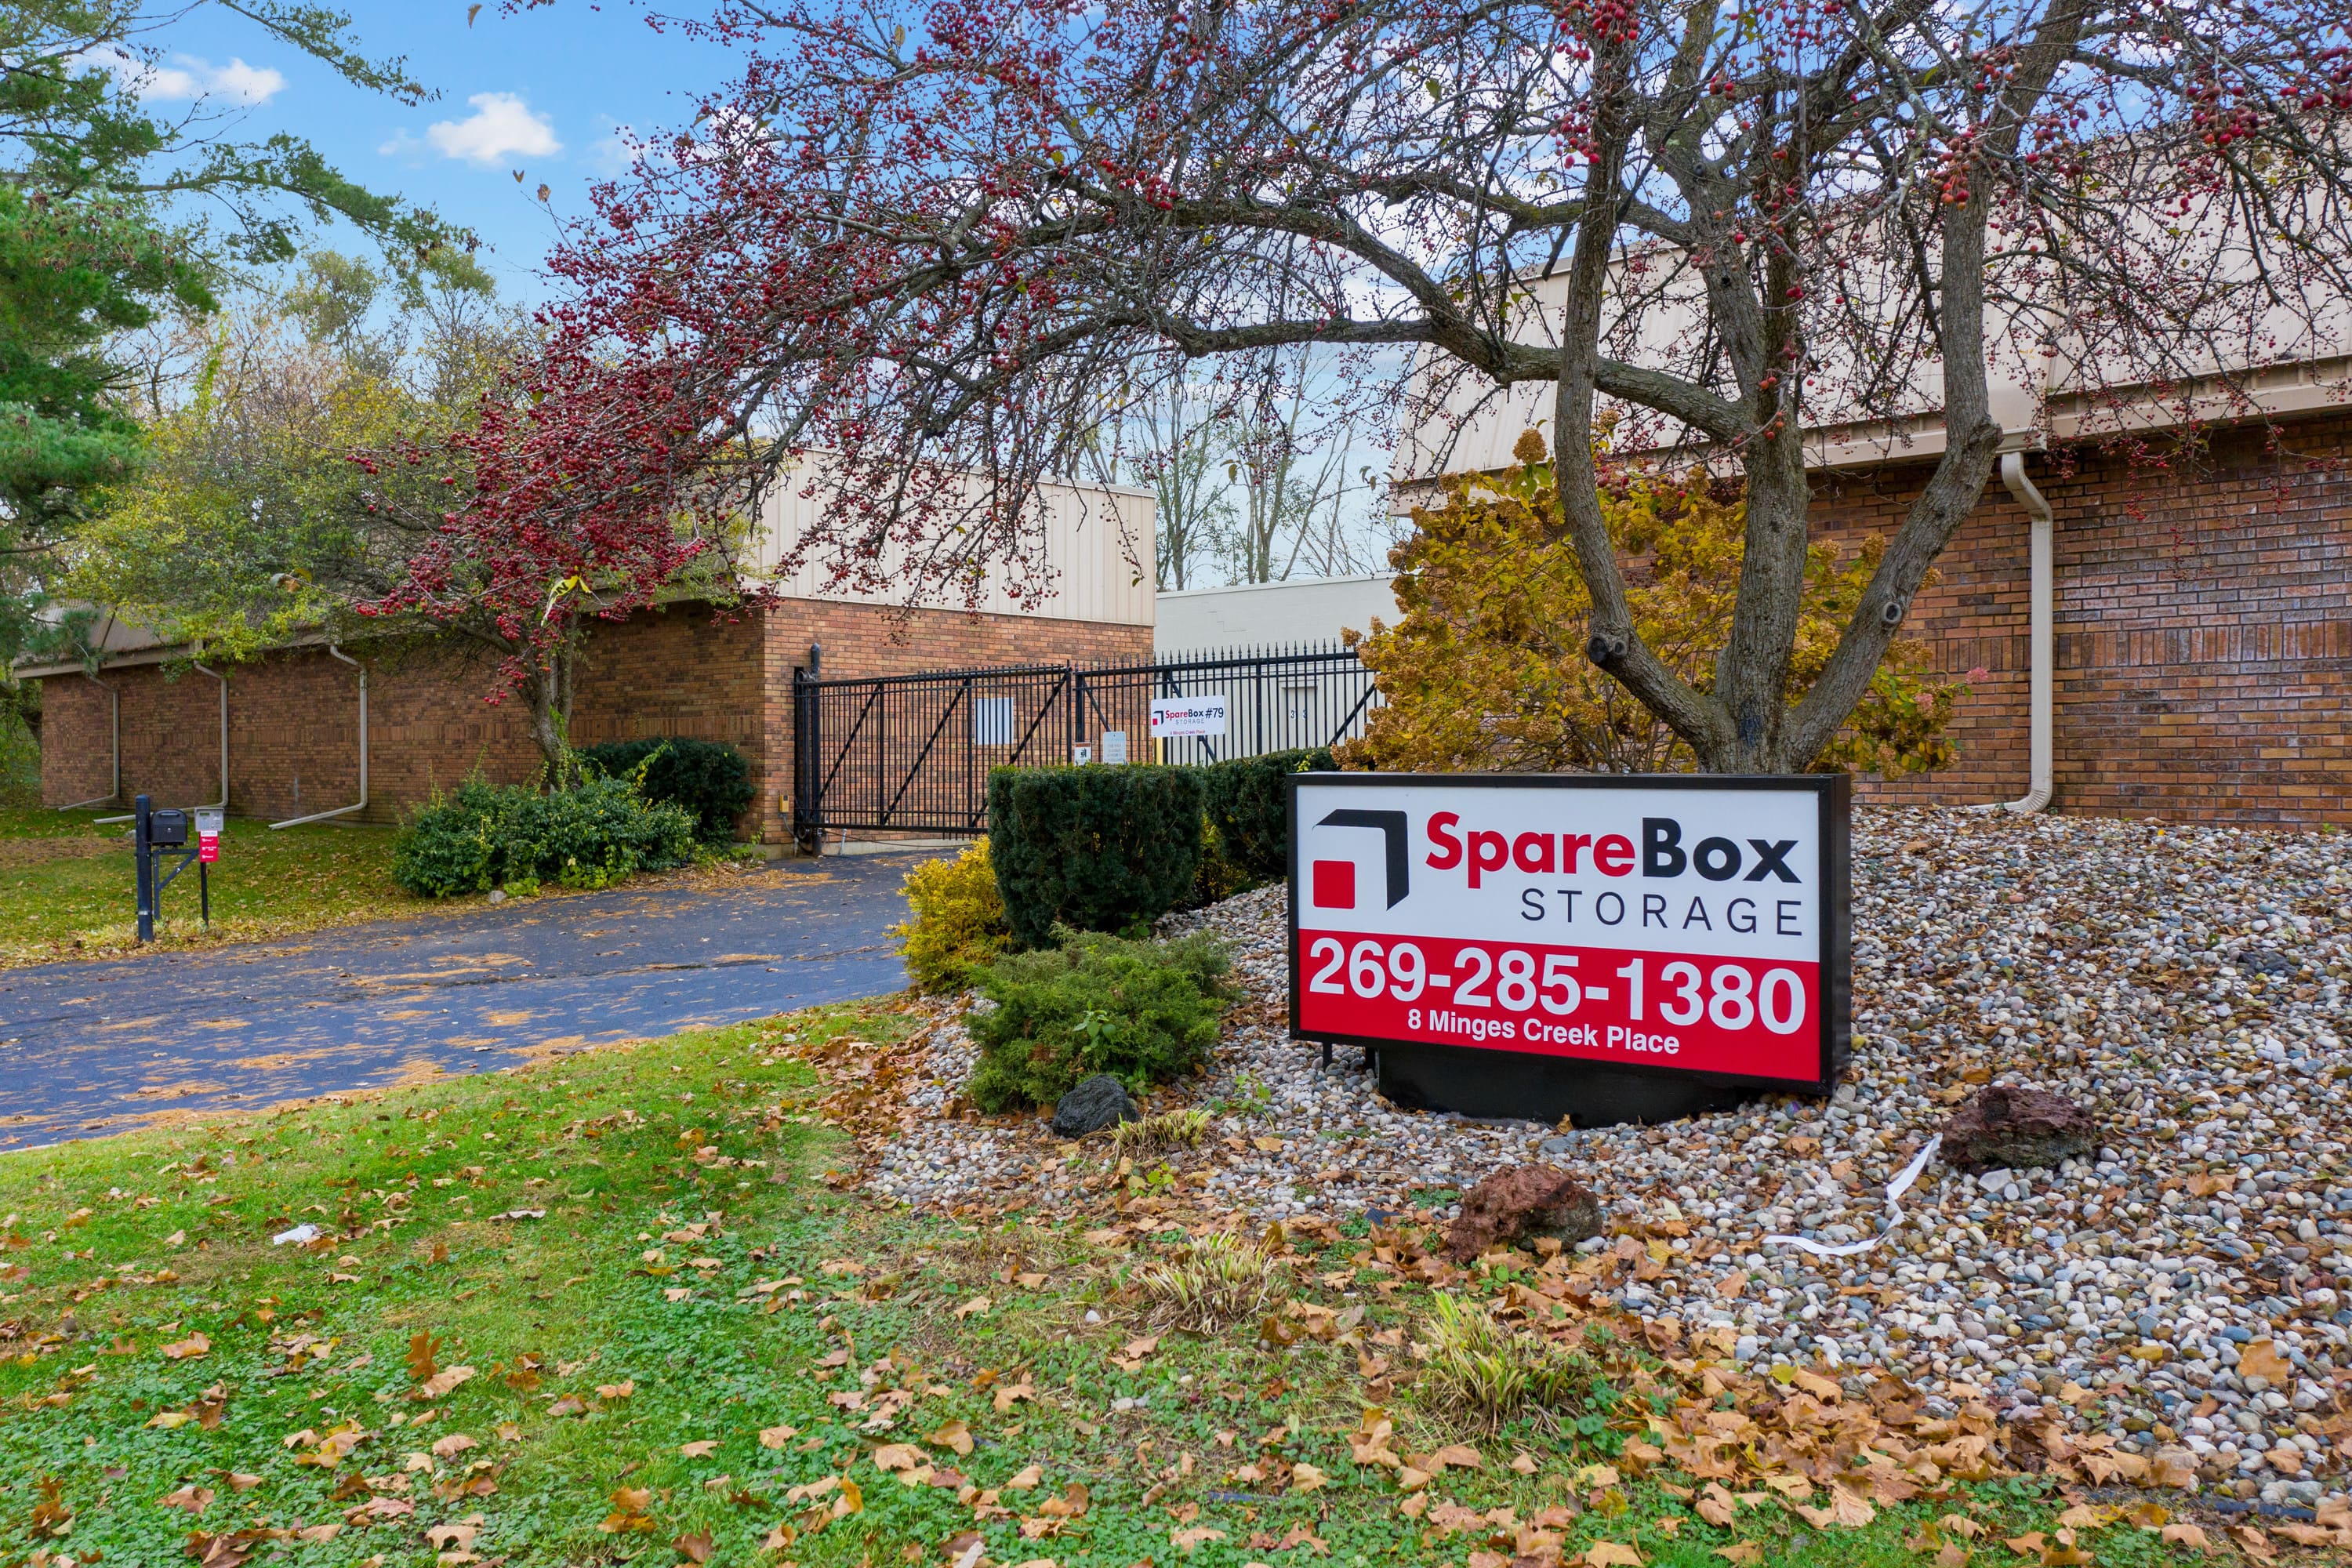 Meet all of your self storage needs in Battle Creek, Michigan at our Minges Creek Place location | SpareBox Storage